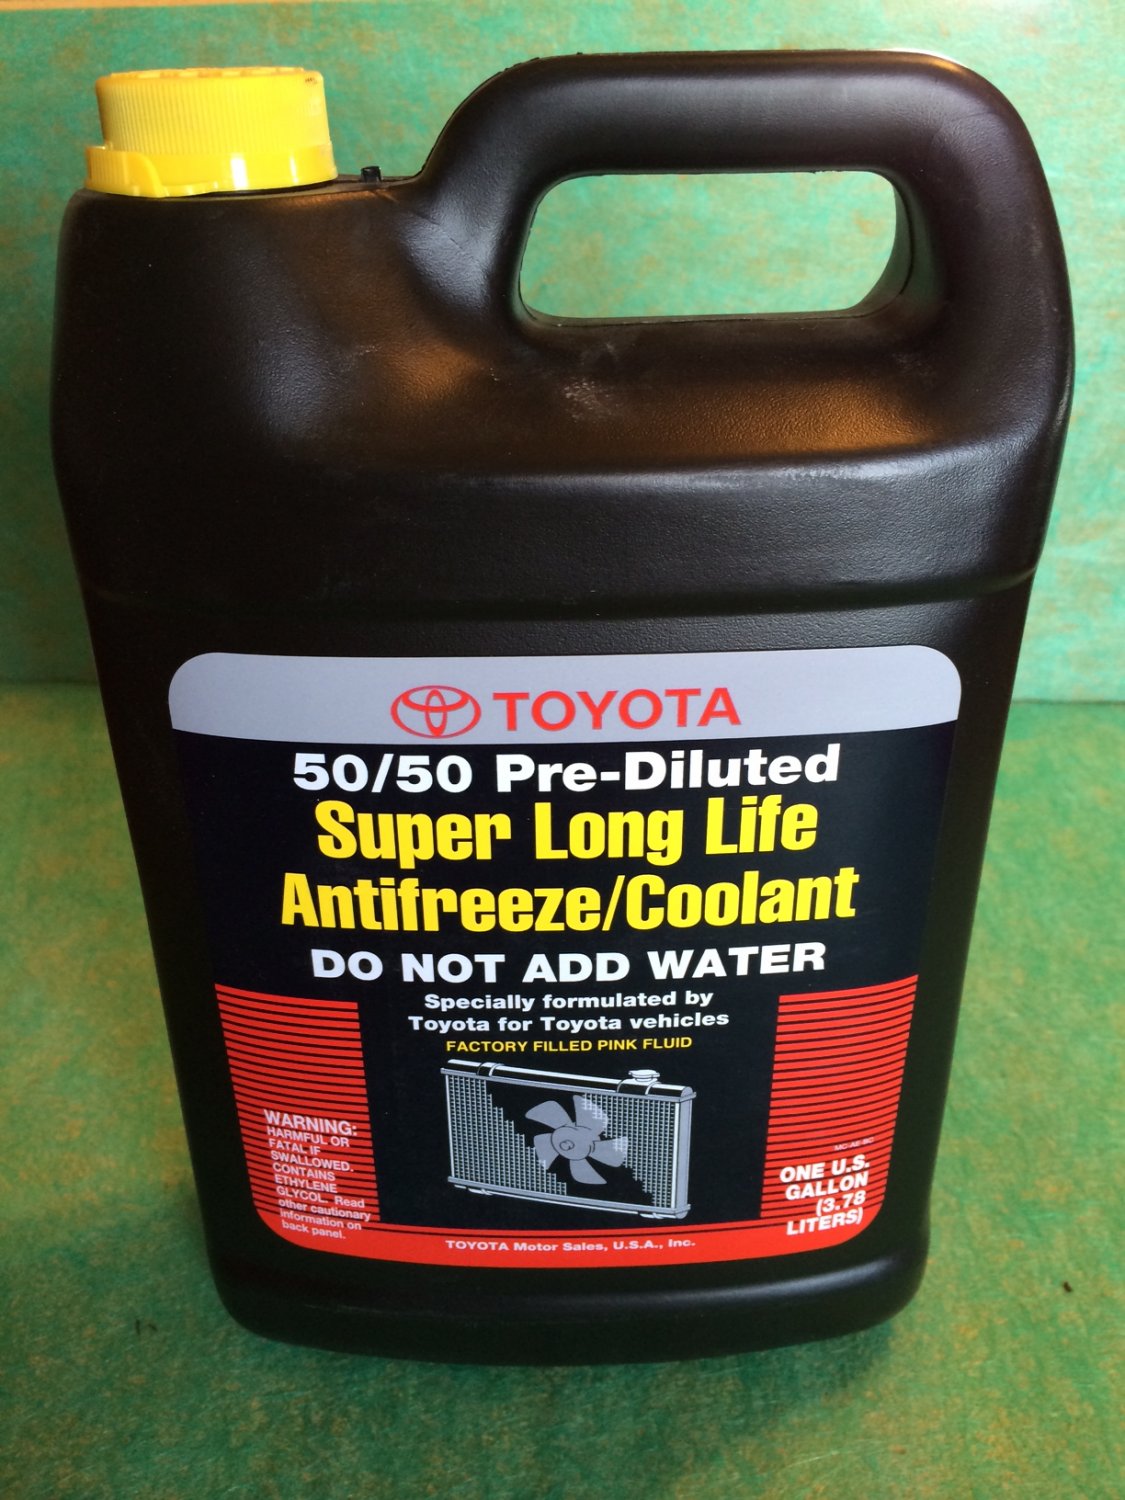 toyota super long life coolant where to buy